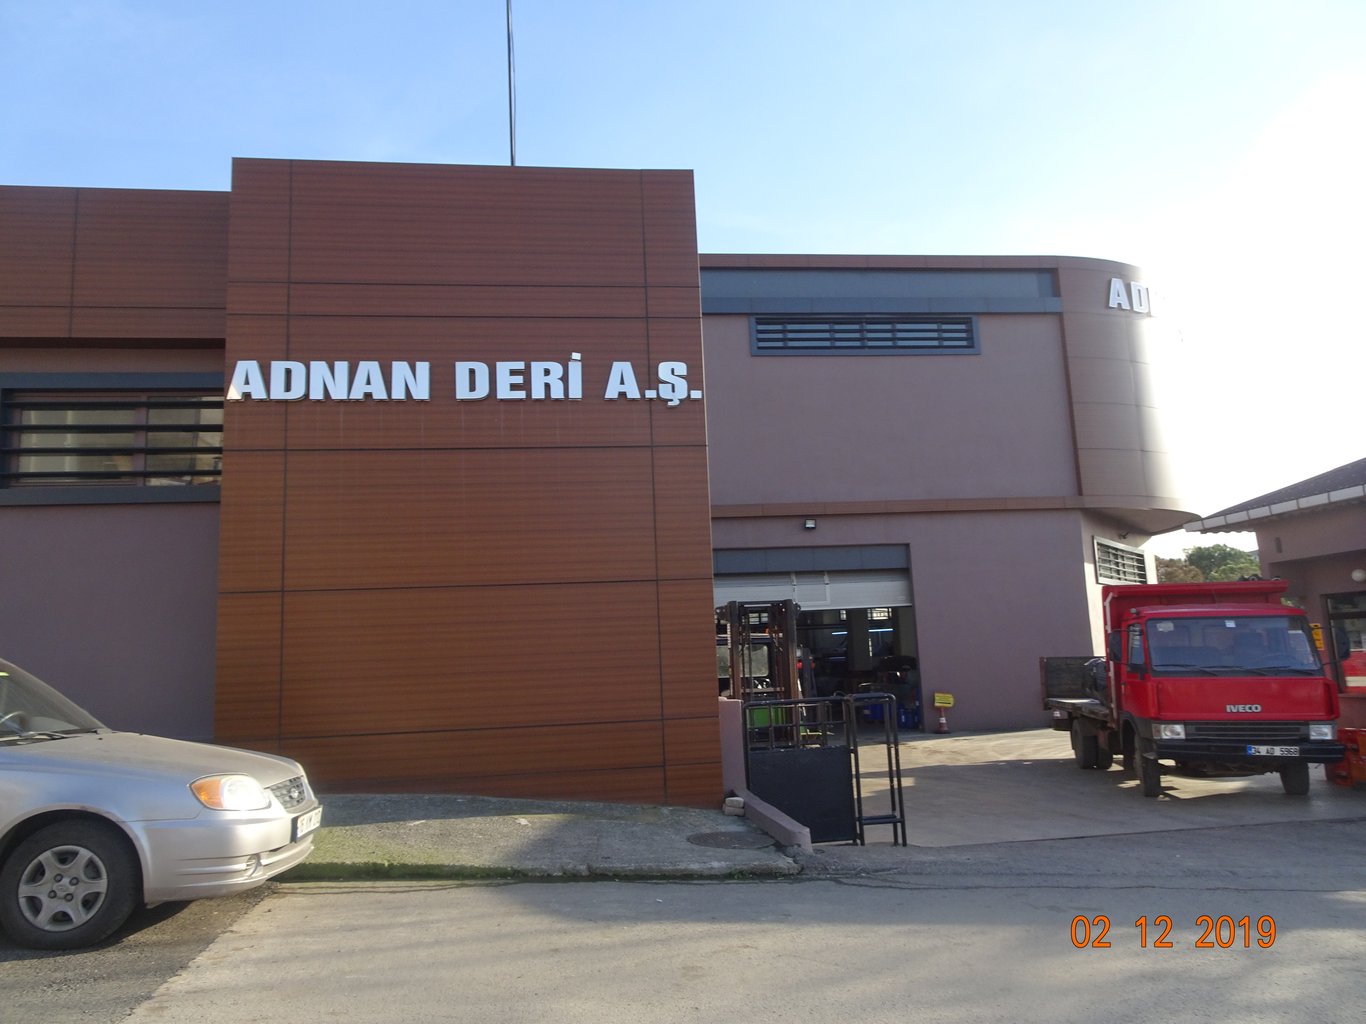 ADNAN LEATHER TANNERY